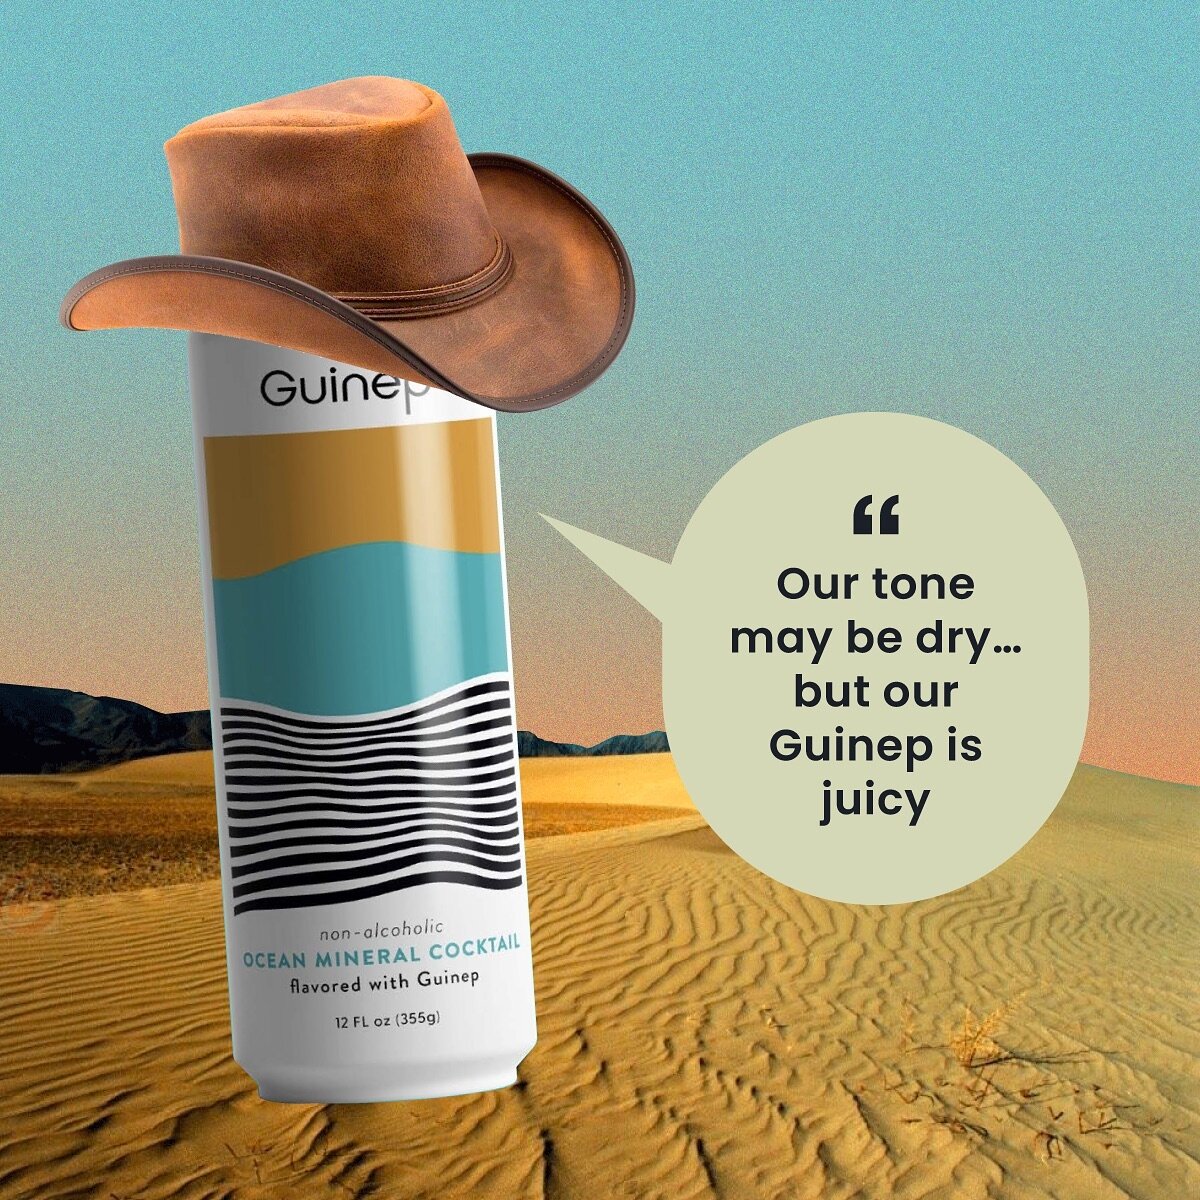 Tangy-sweet guinep fruit and refreshing deep ocean minerals. Feeling loose? Blame it on our juice. #drinkguinep